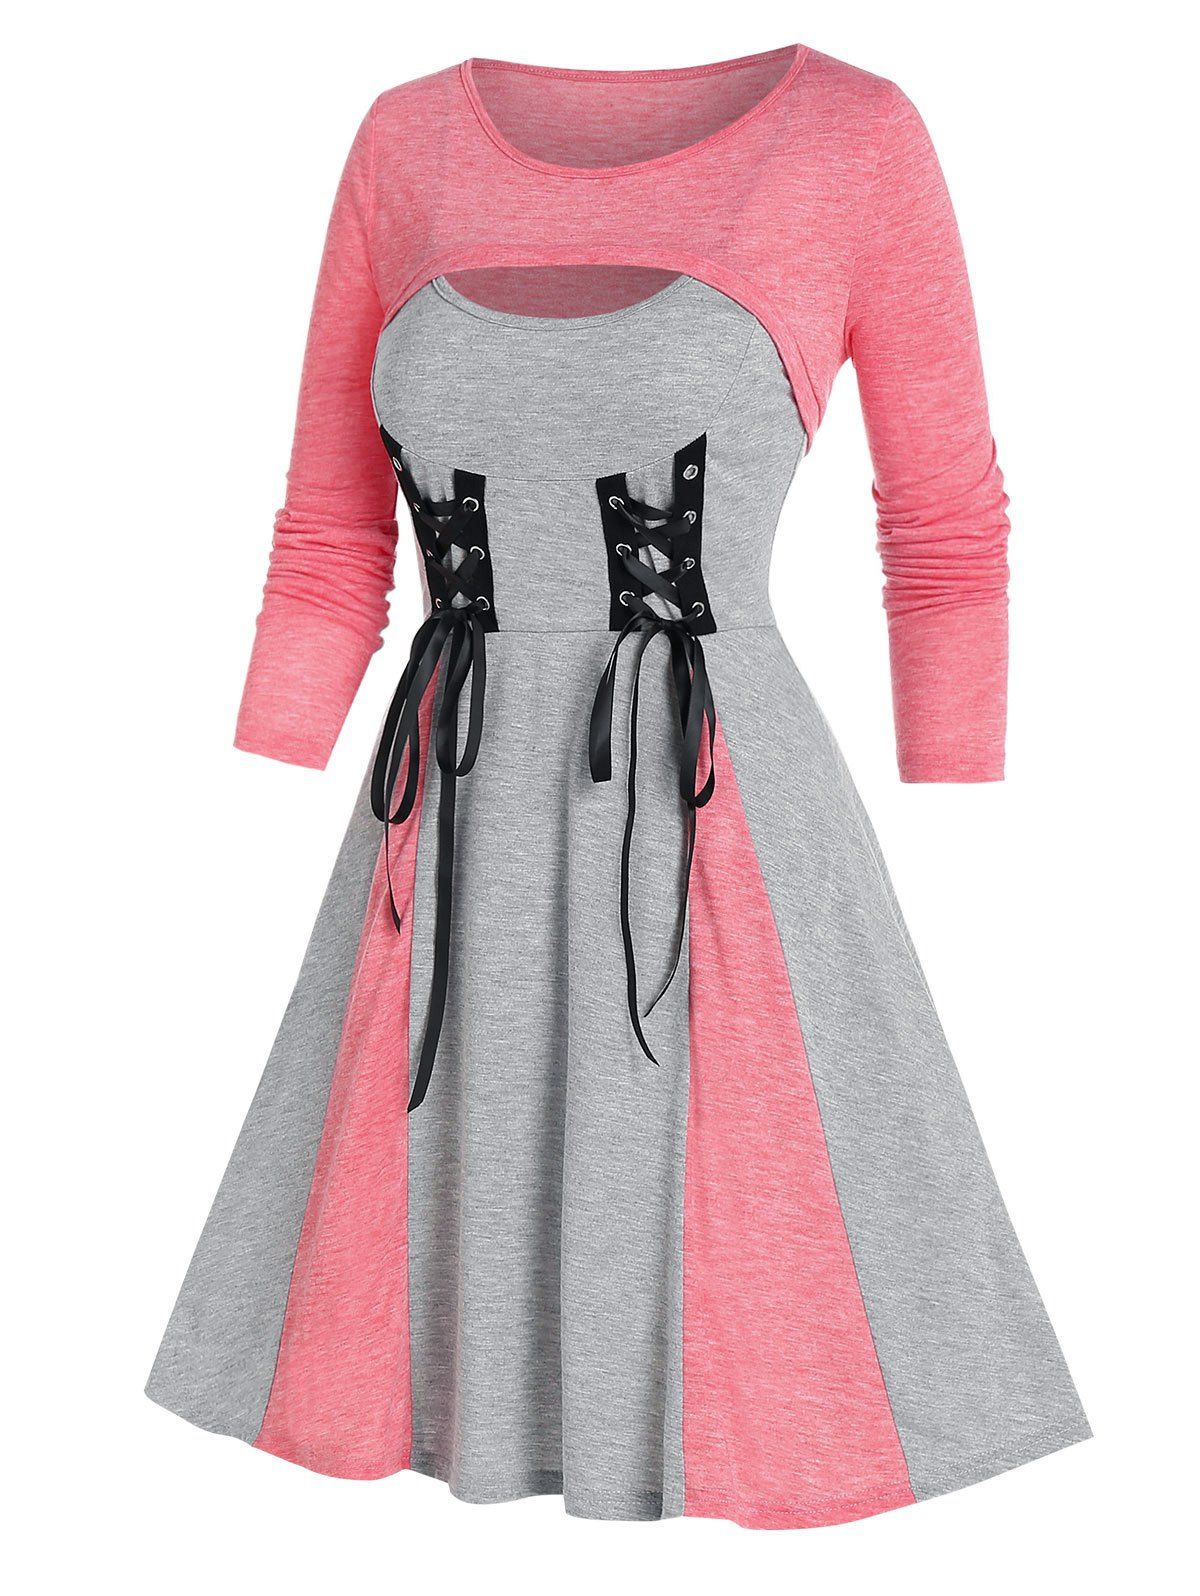 Contrast Colorblock Lace Up Cami Flare Dress and Shrug Top Set - GRAY XL